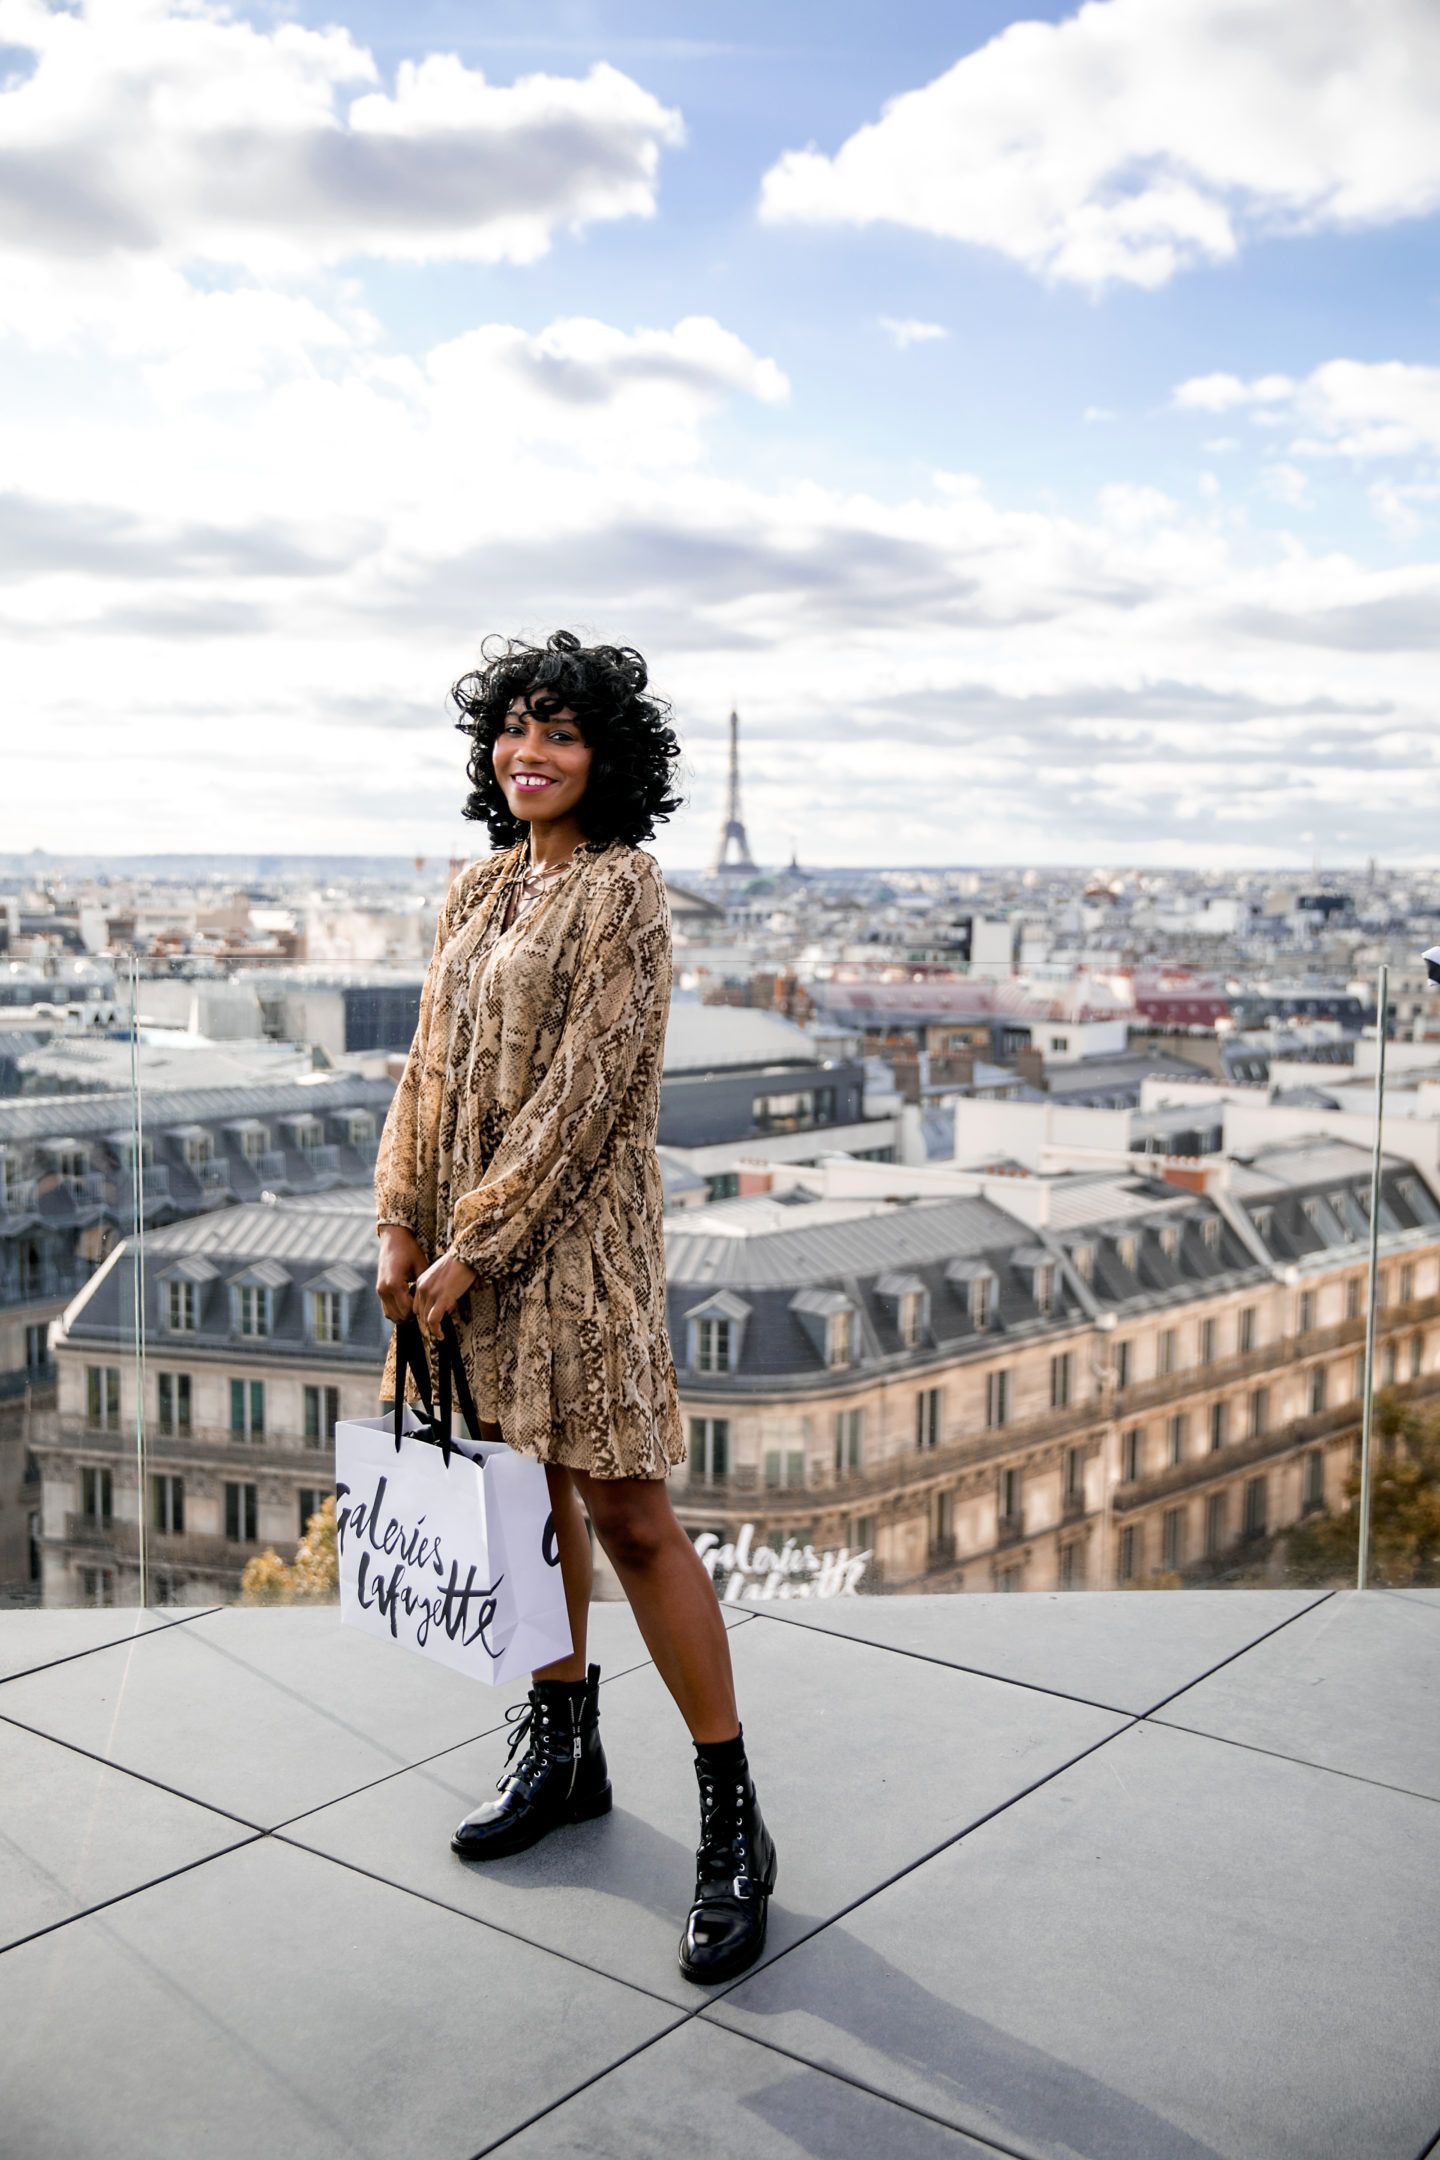 Galeries Lafayette own brands — Go for Good